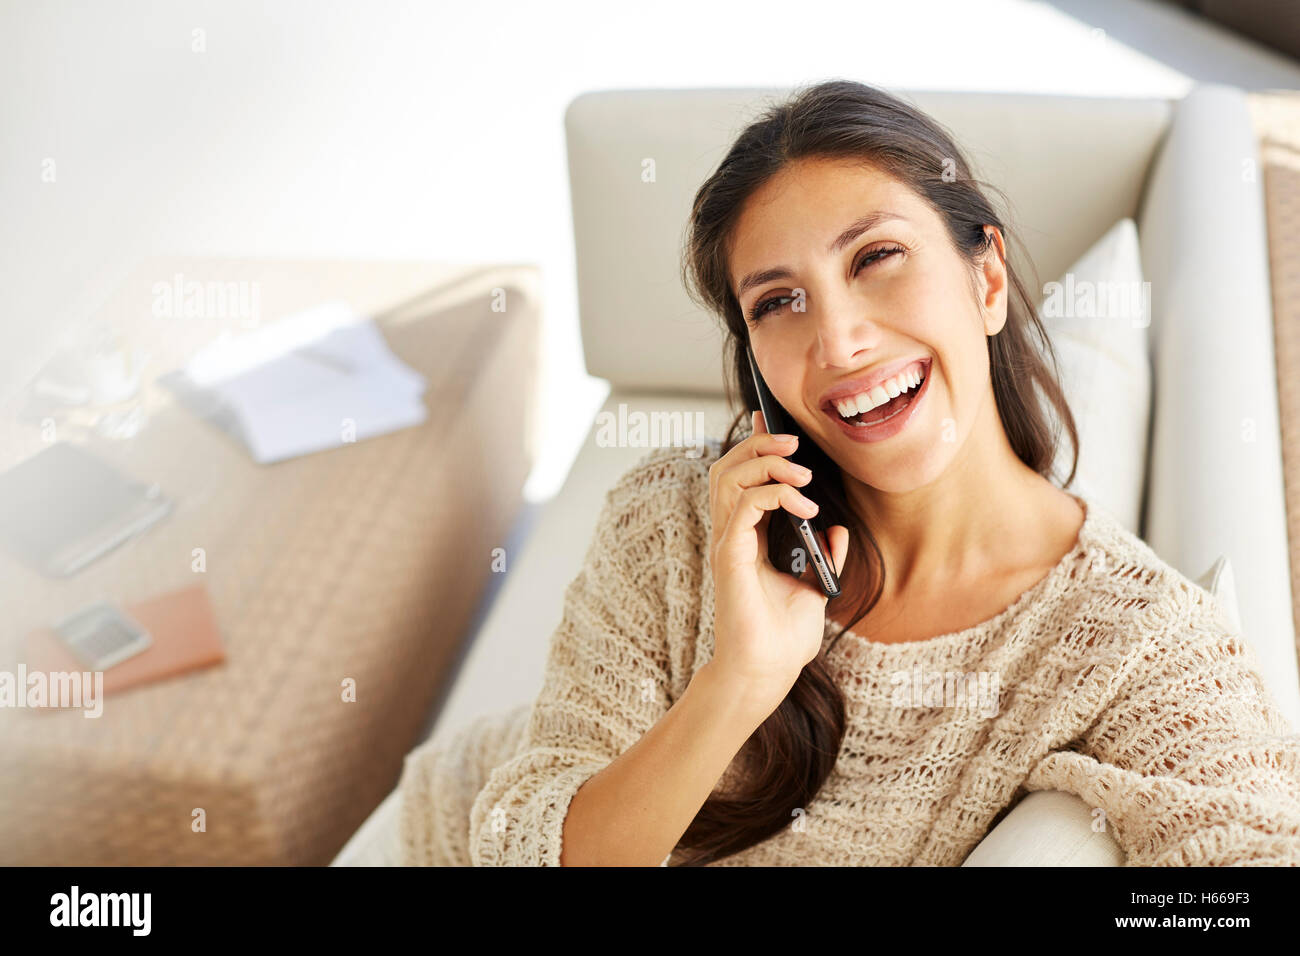 Laughing woman talking on cell phone on sofa Stock Photo